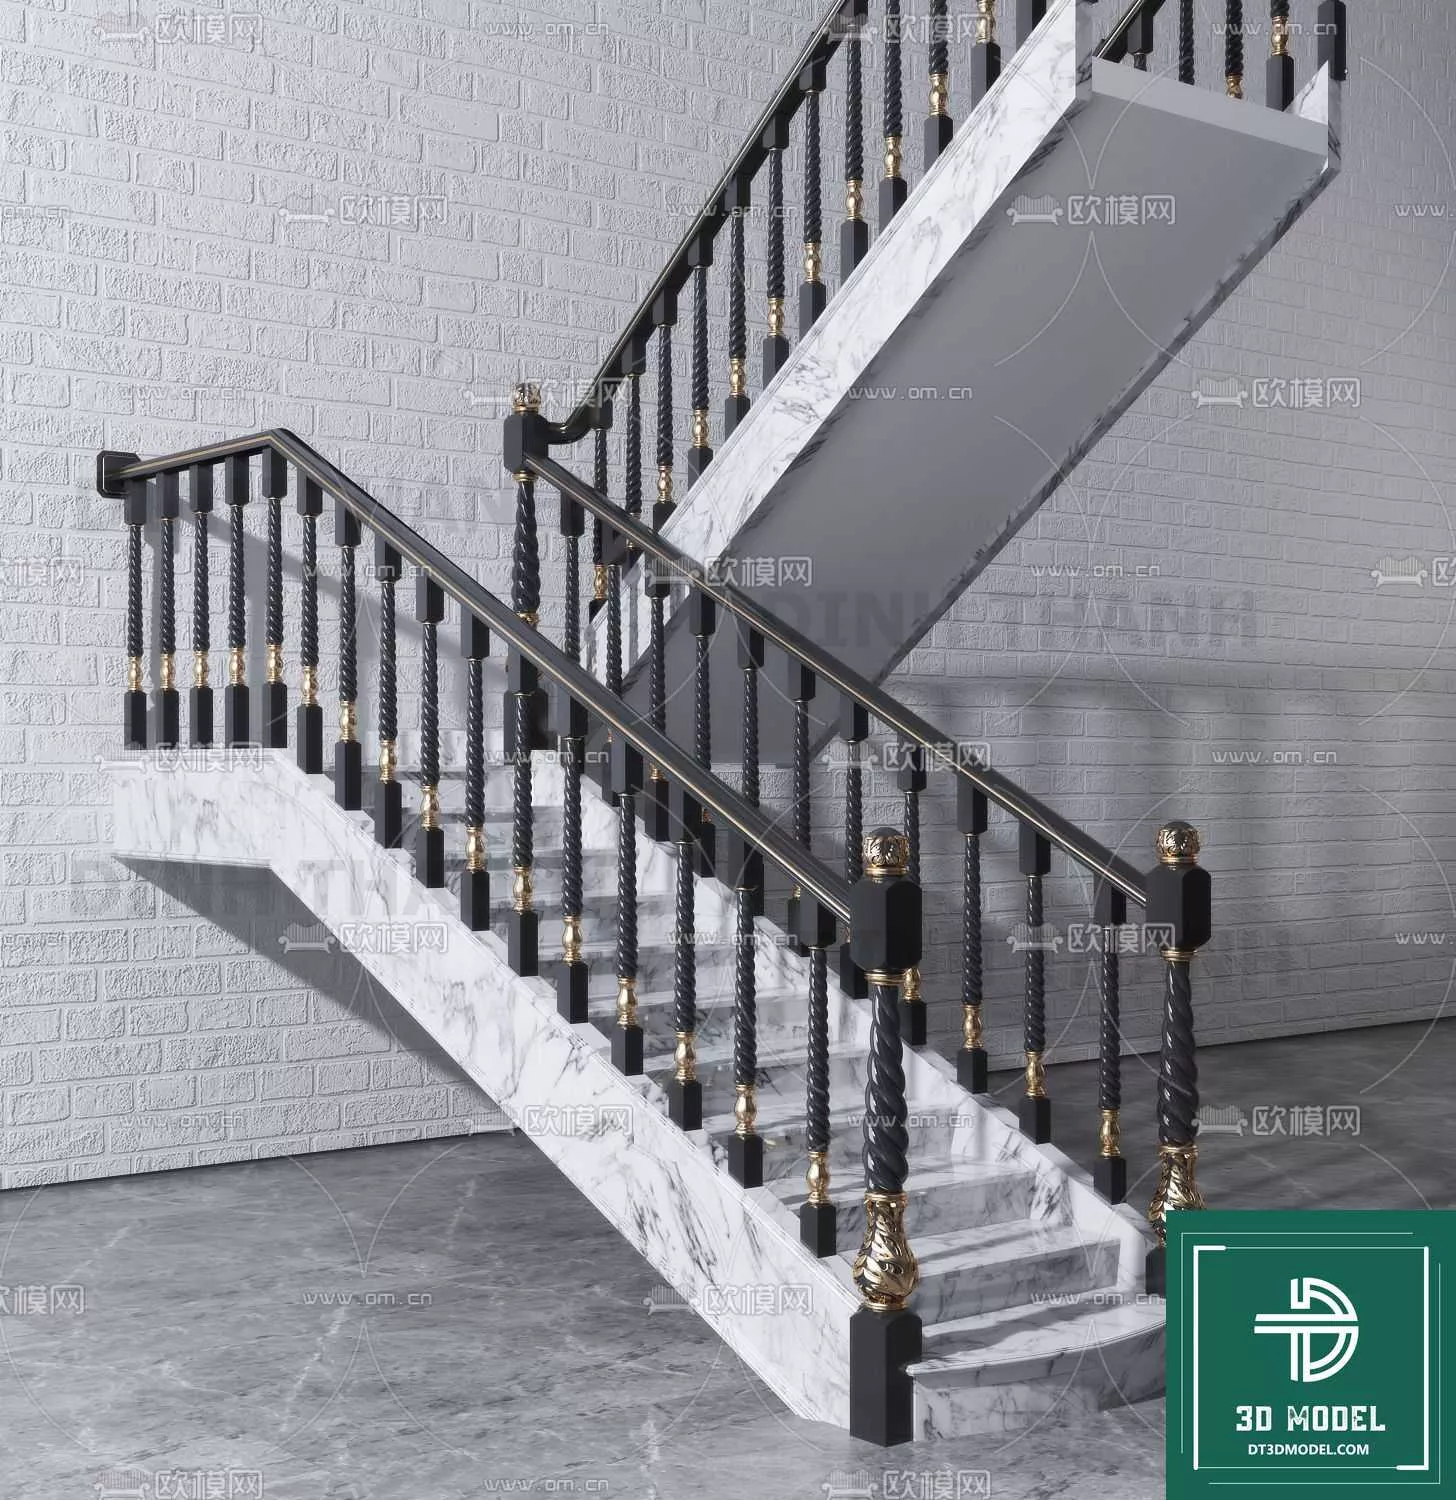 MODERN STAIR - SKETCHUP 3D MODEL - VRAY OR ENSCAPE - ID14263